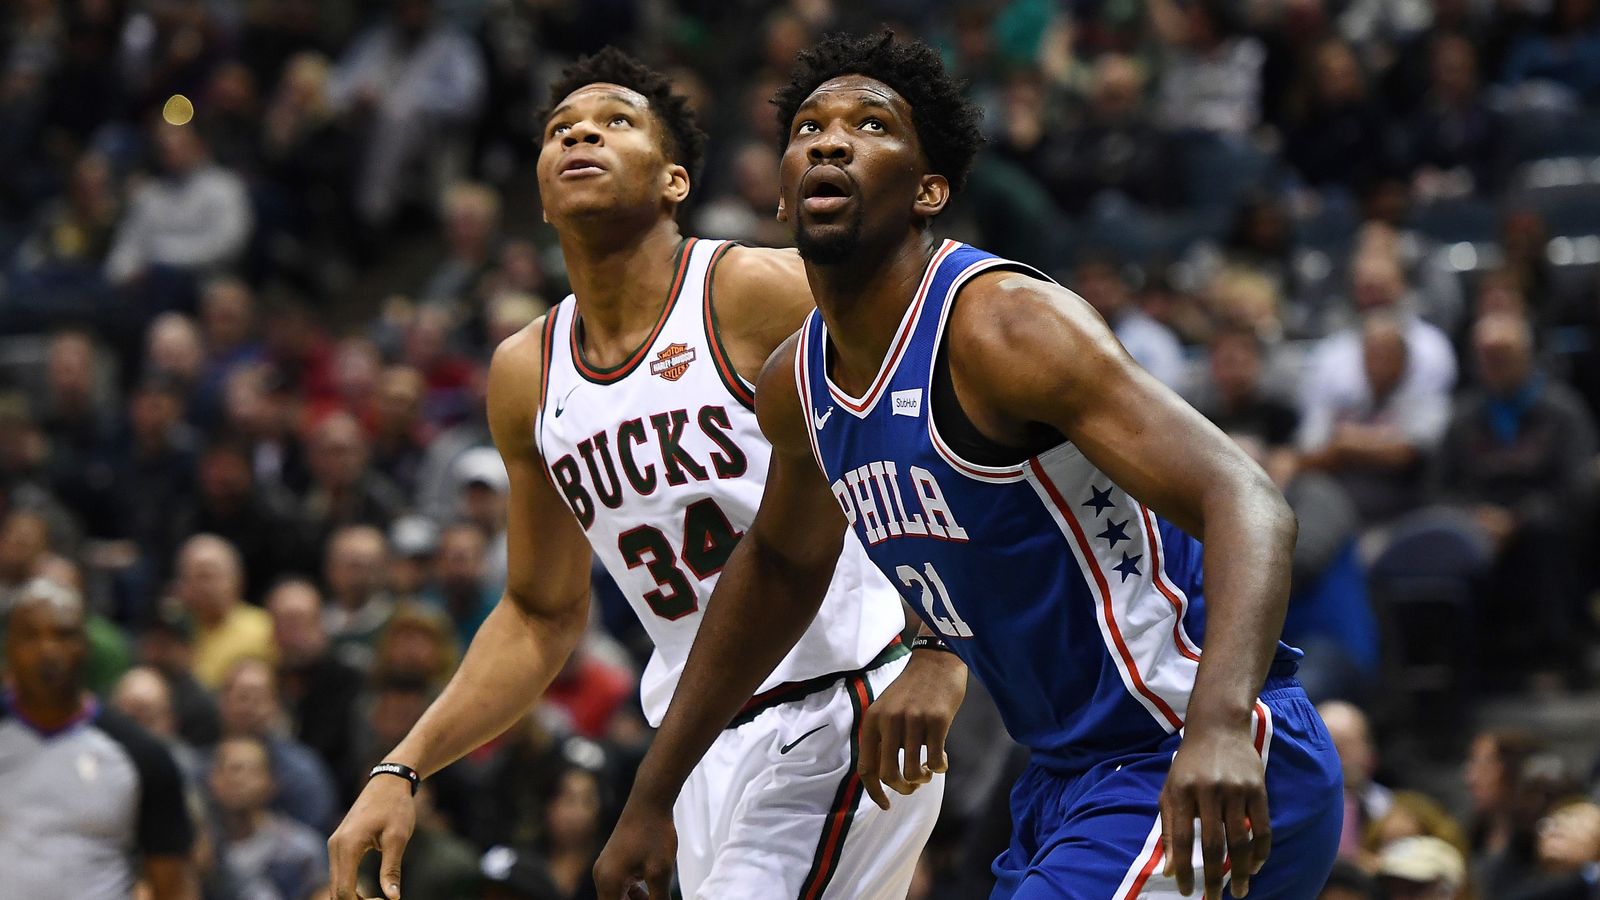 NBA Week 22: Giannis Antetokounmpo, Joel Embiid, Andre Drummond and more making noise ...